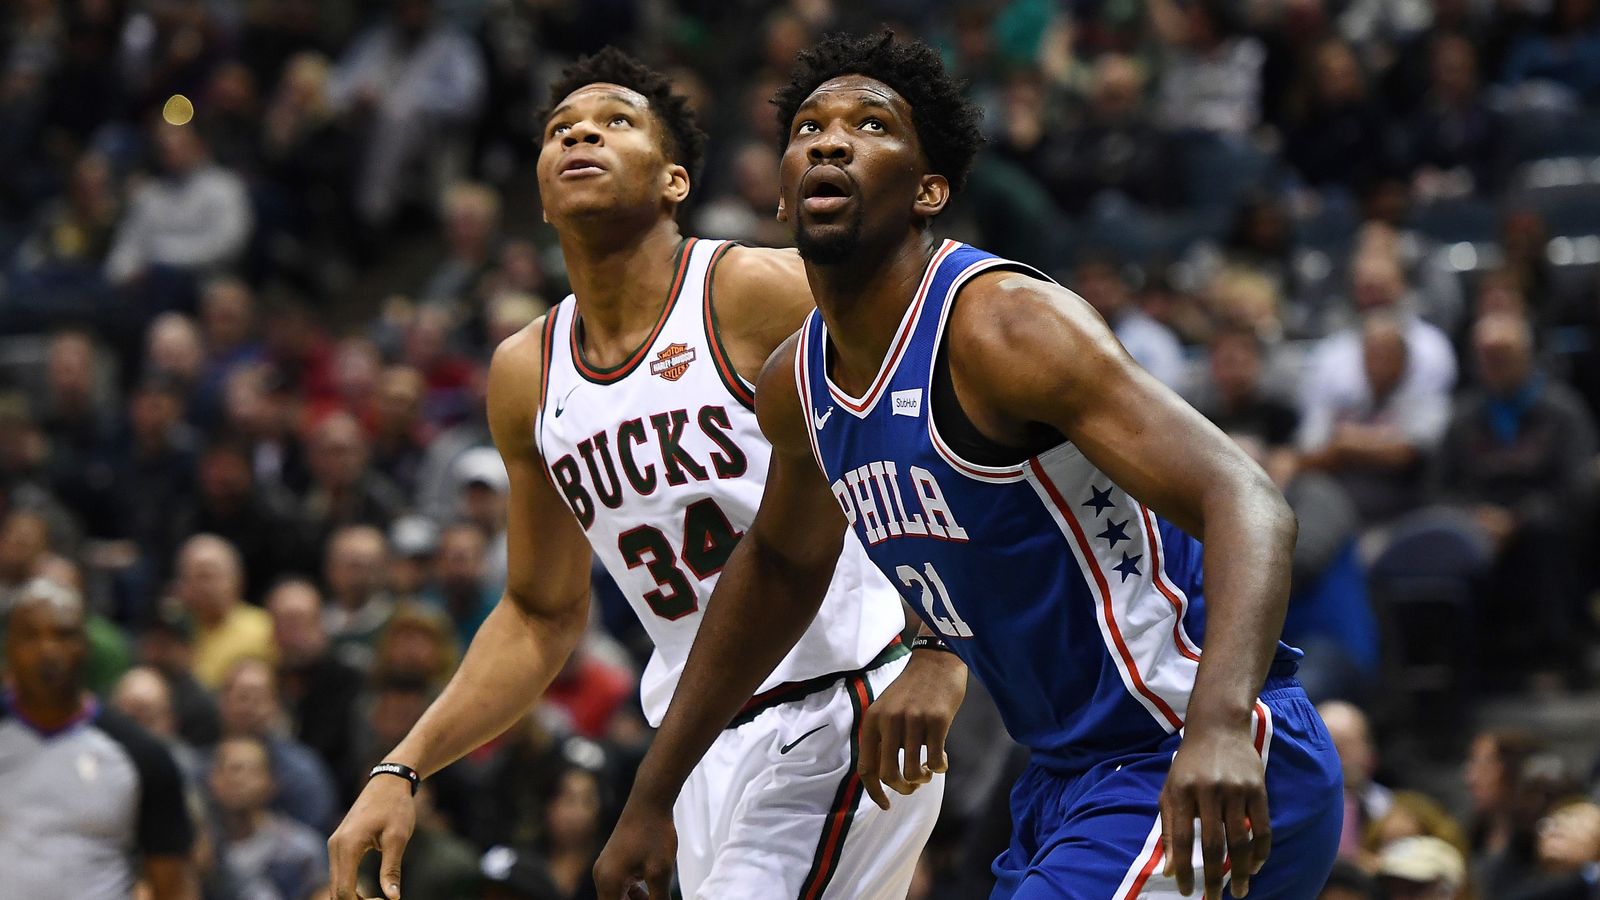 NBA Week 22: Giannis Antetokounmpo, Joel Embiid, Andre Drummond and more making noise ...